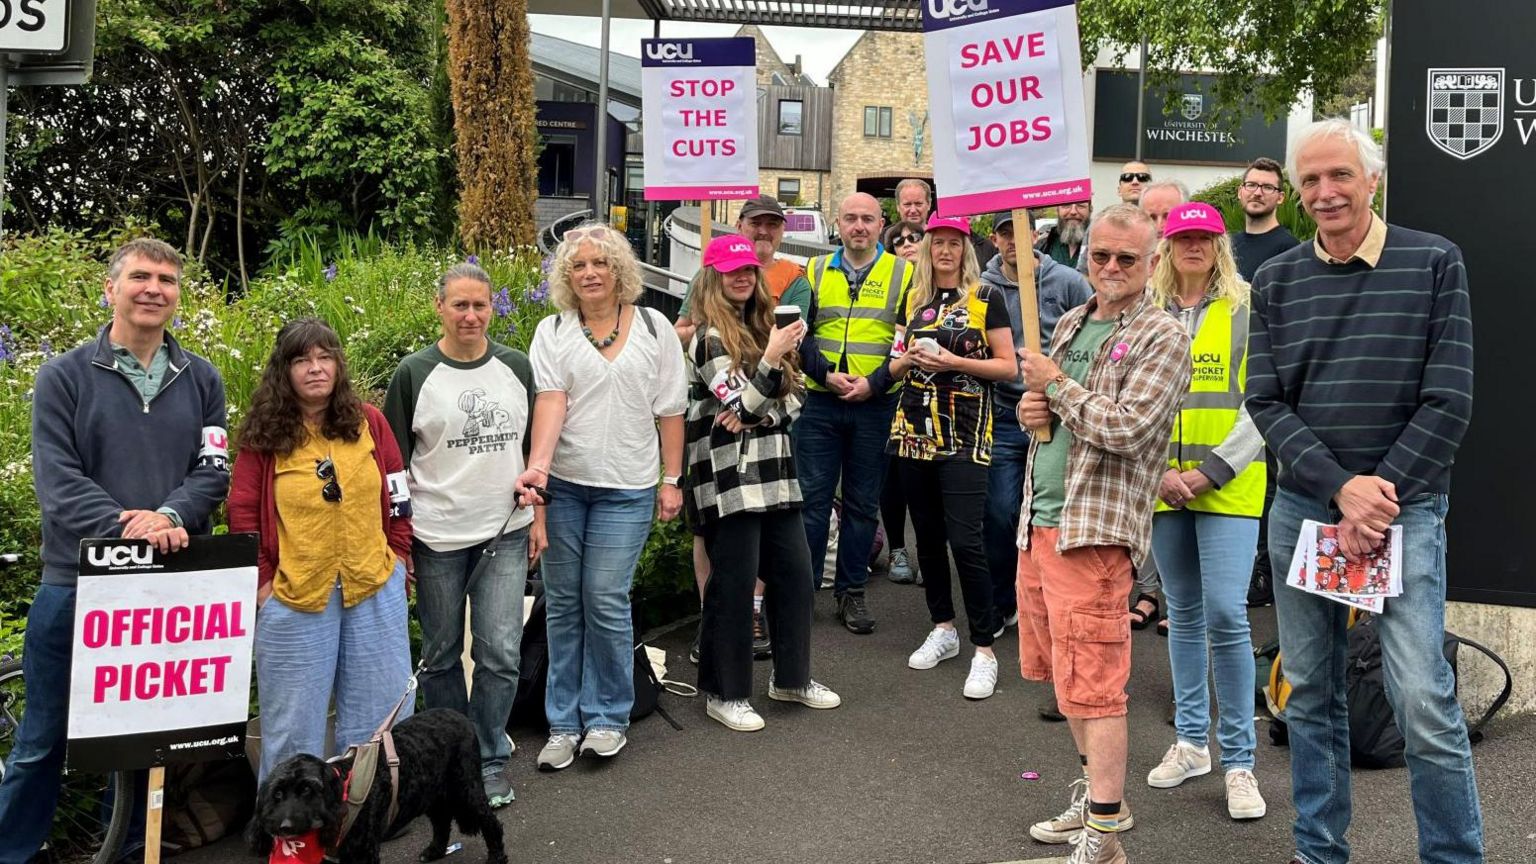 Striking staff at the University of Winchester